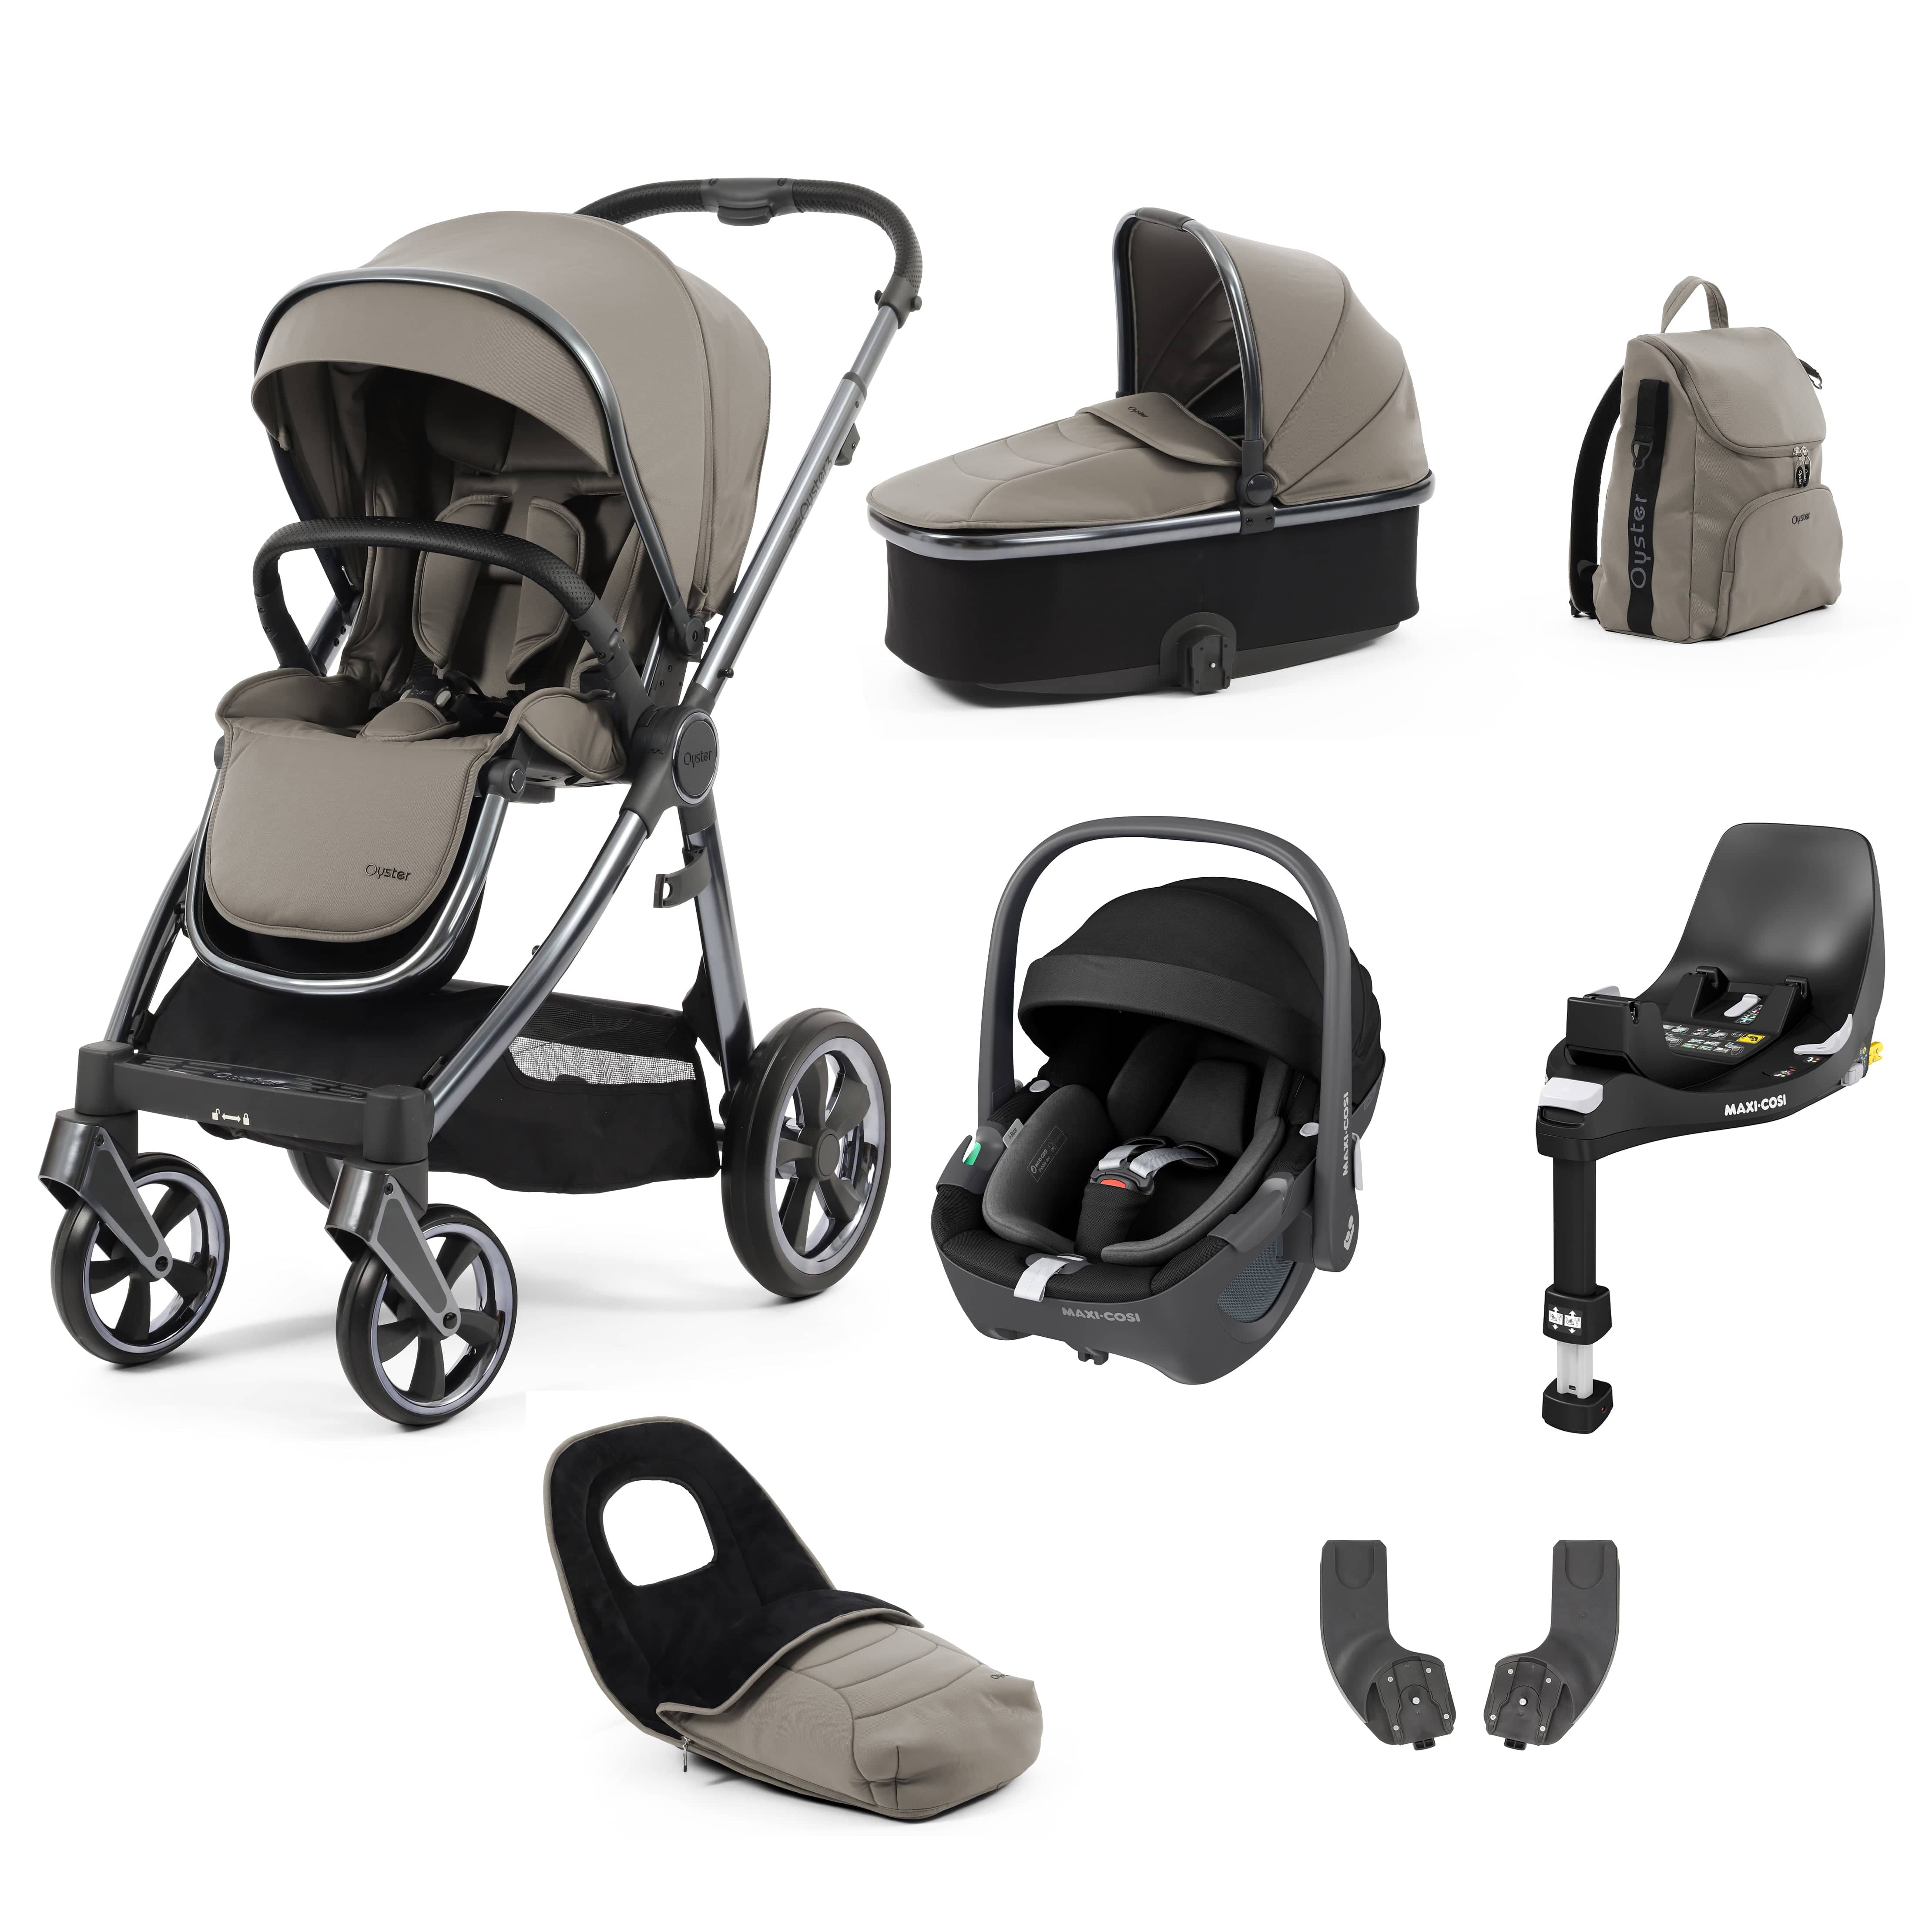 Babystyle Oyster 3 Luxury 7 Piece with Car Seat Bundle in Stone Travel Systems 14809-STN 5060711567259